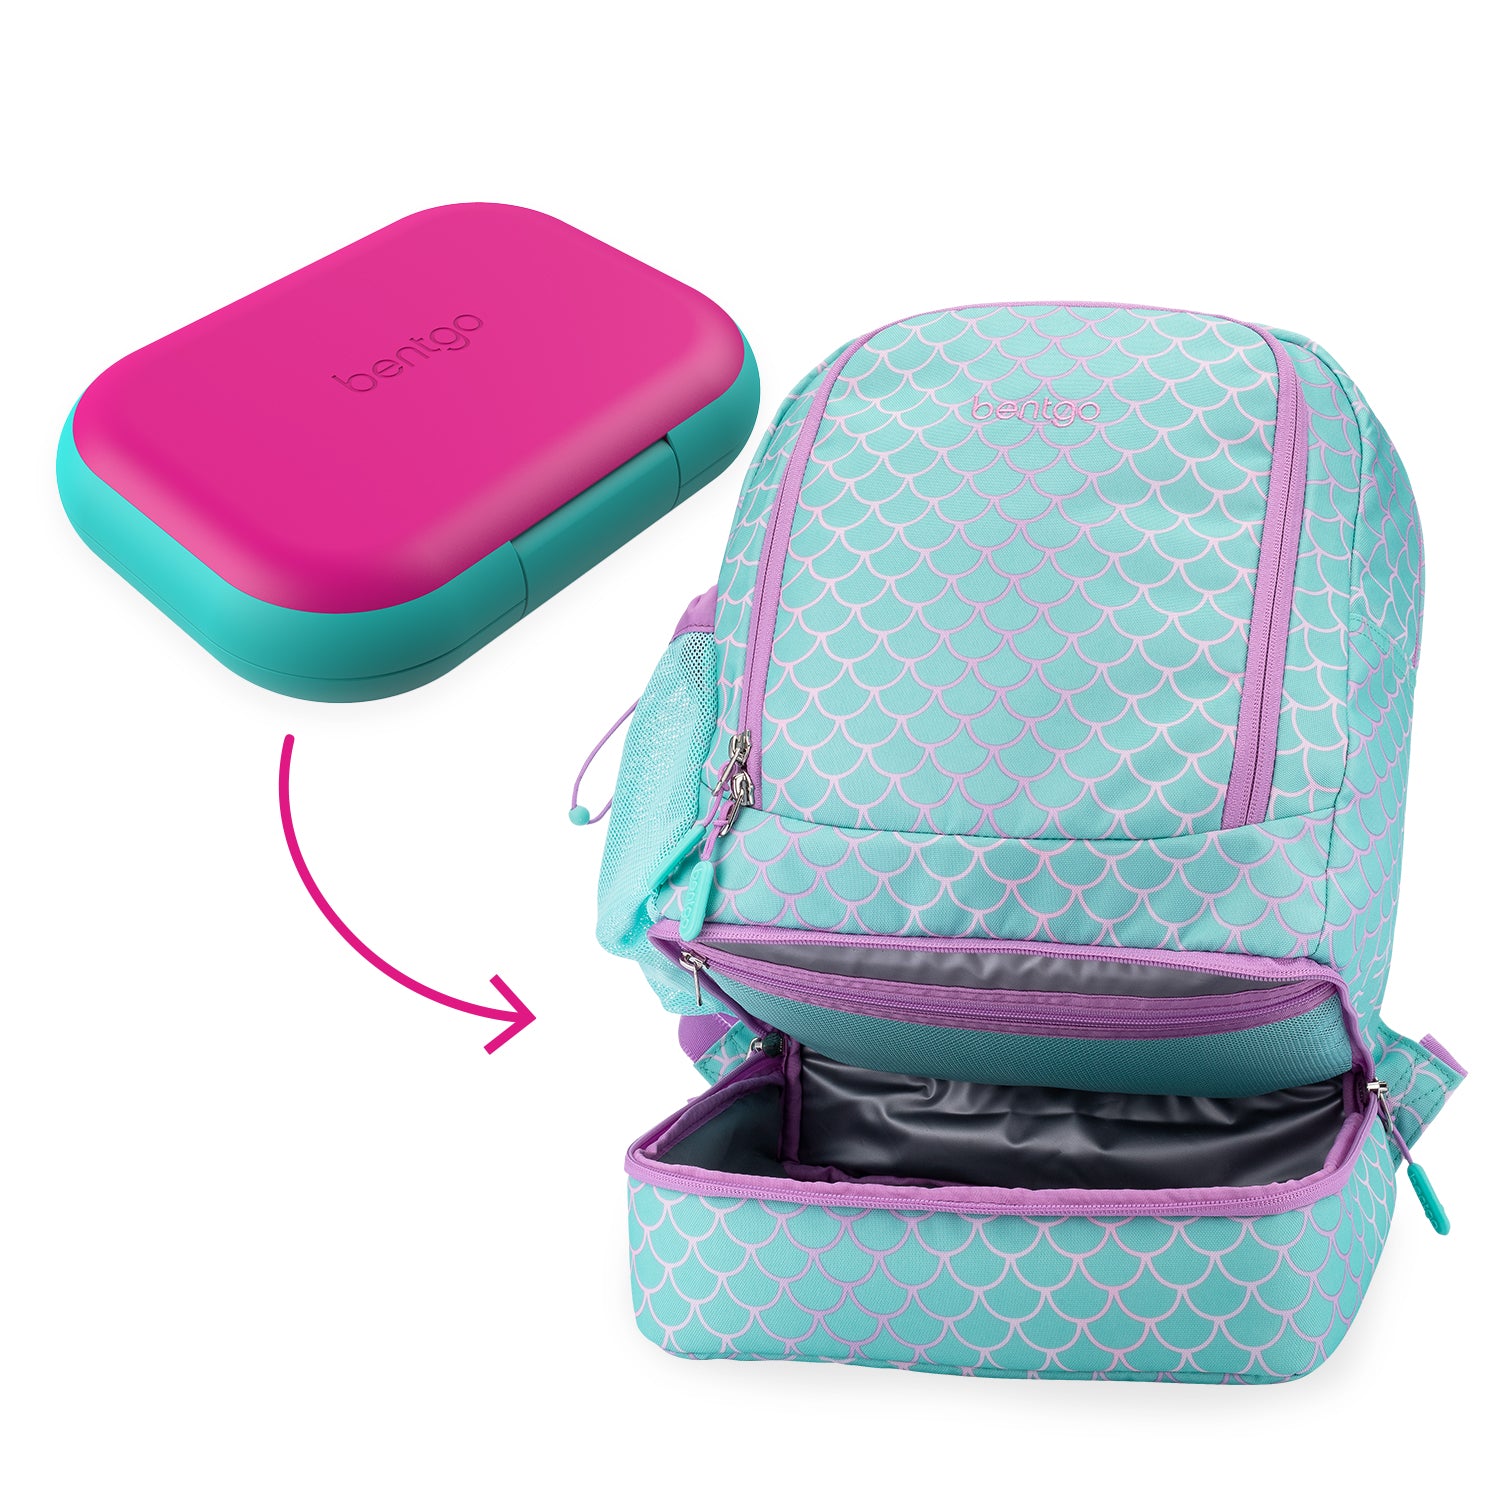 Lunch bags for women - Buy the best product with free shipping on AliExpress